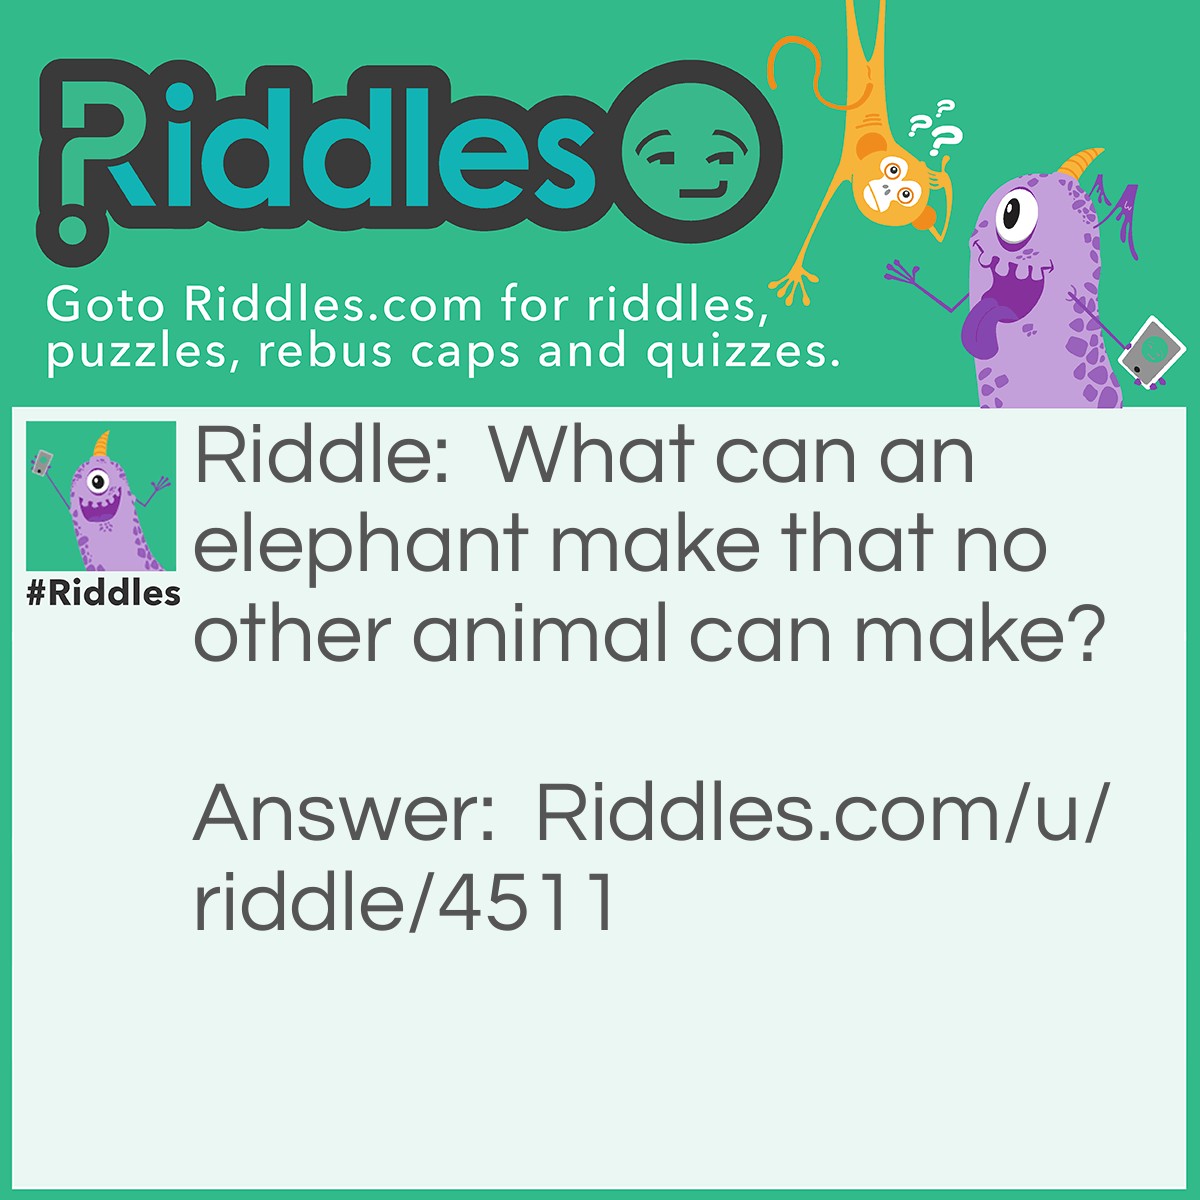 Riddle: What can an elephant make that no other animal can make? Answer: A baby elephant.